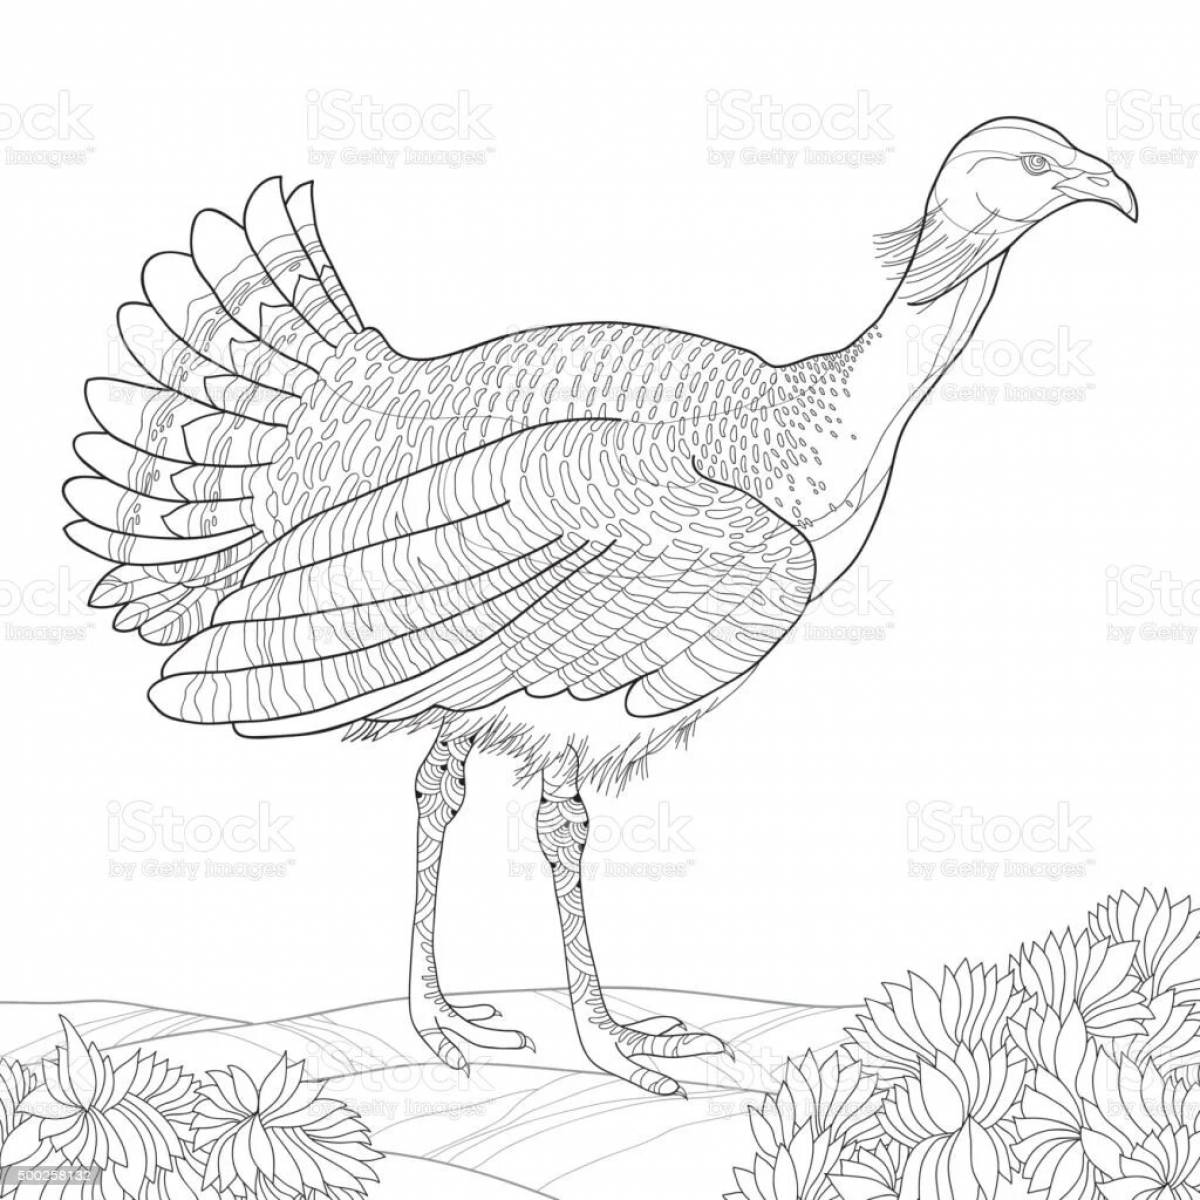 Outstanding black grouse coloring page for kids